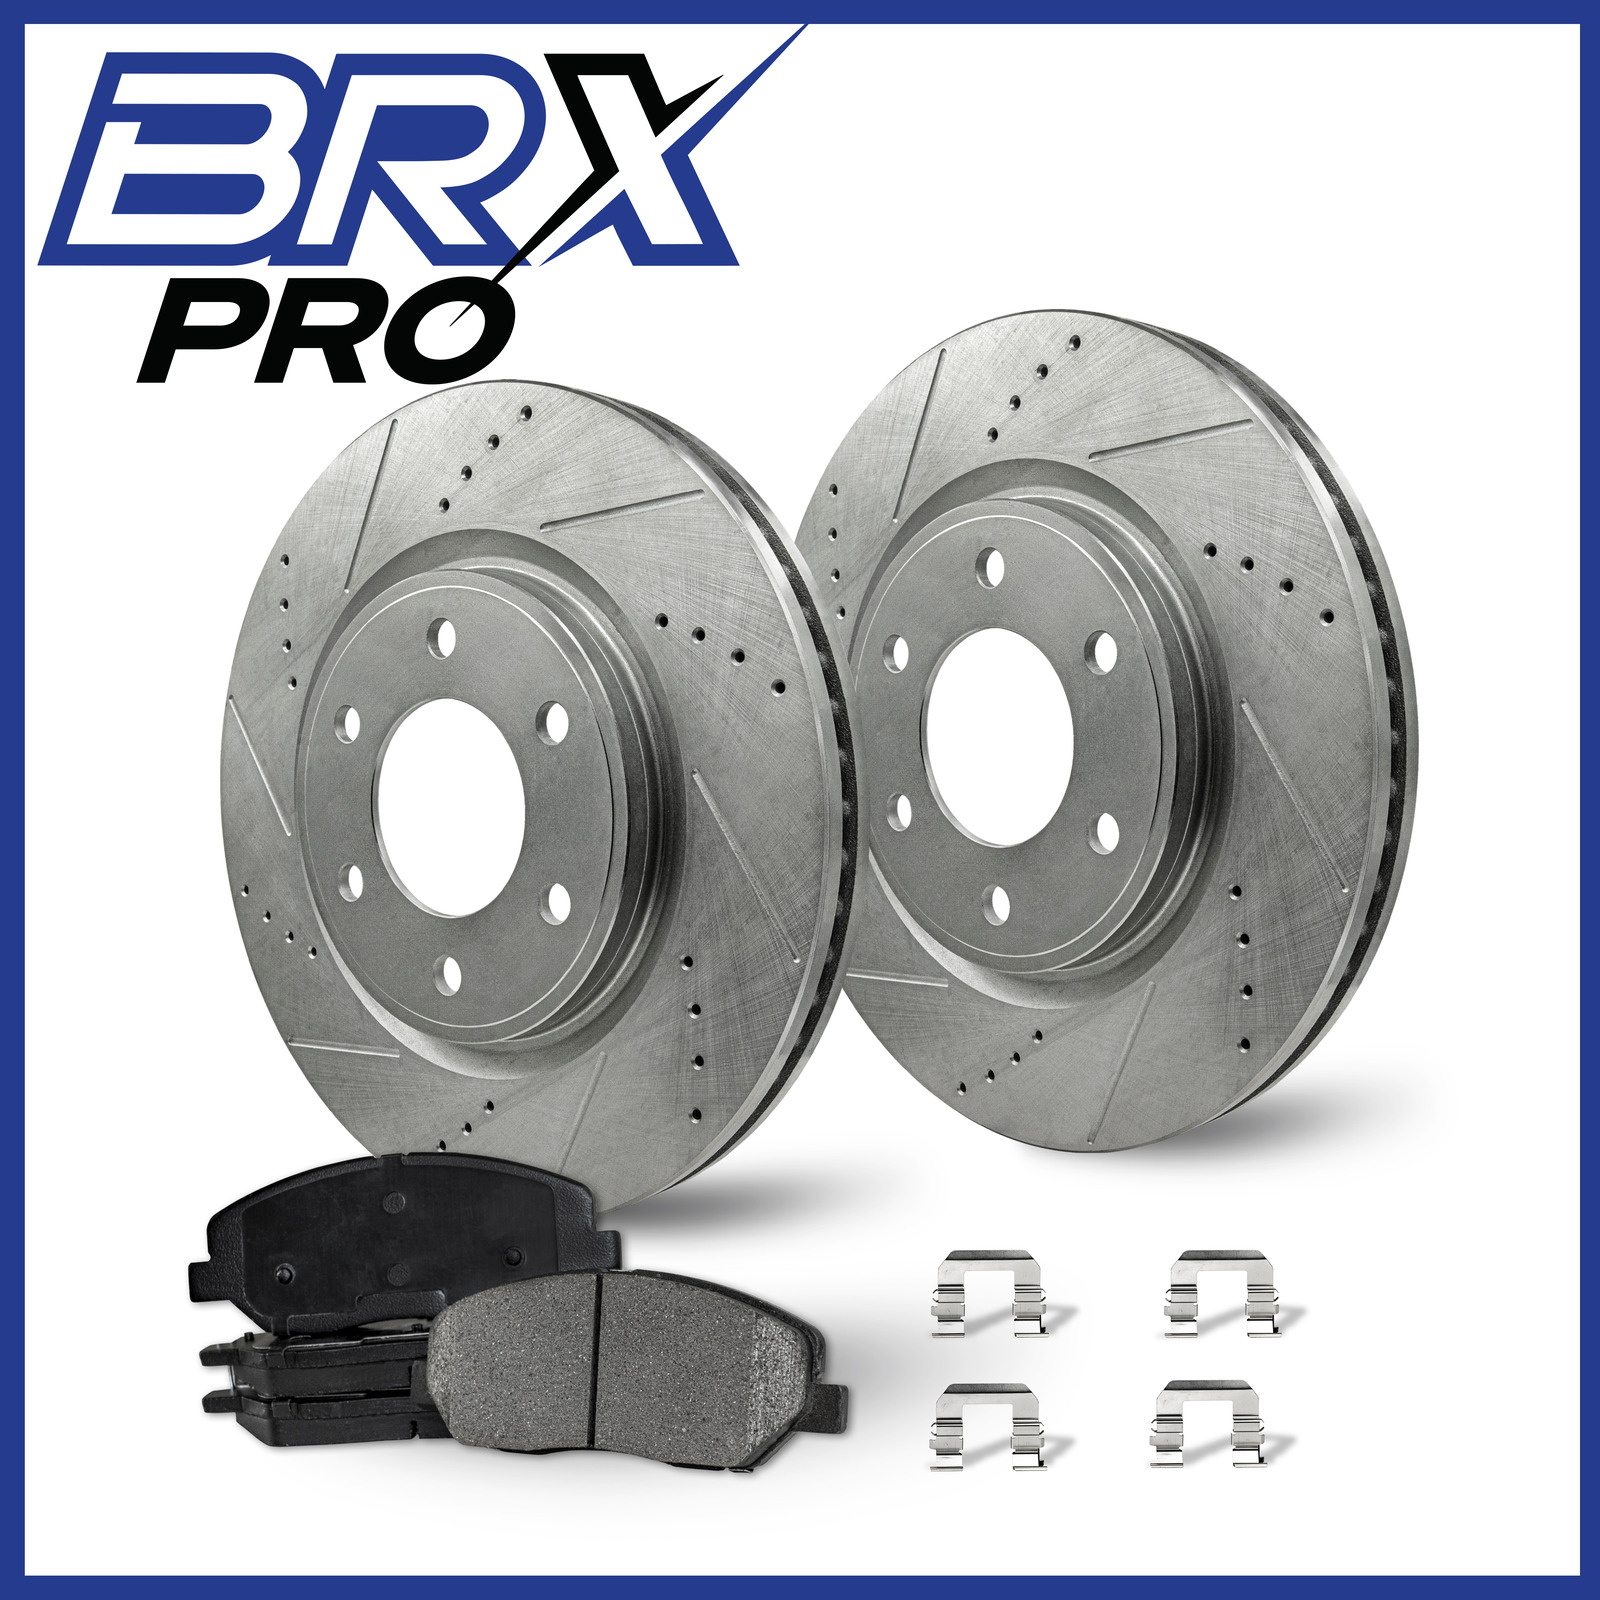 330 mm Front Rotor + Pads For Chevy Silverado 1500 SS (07)|NO RUST Brake Kit